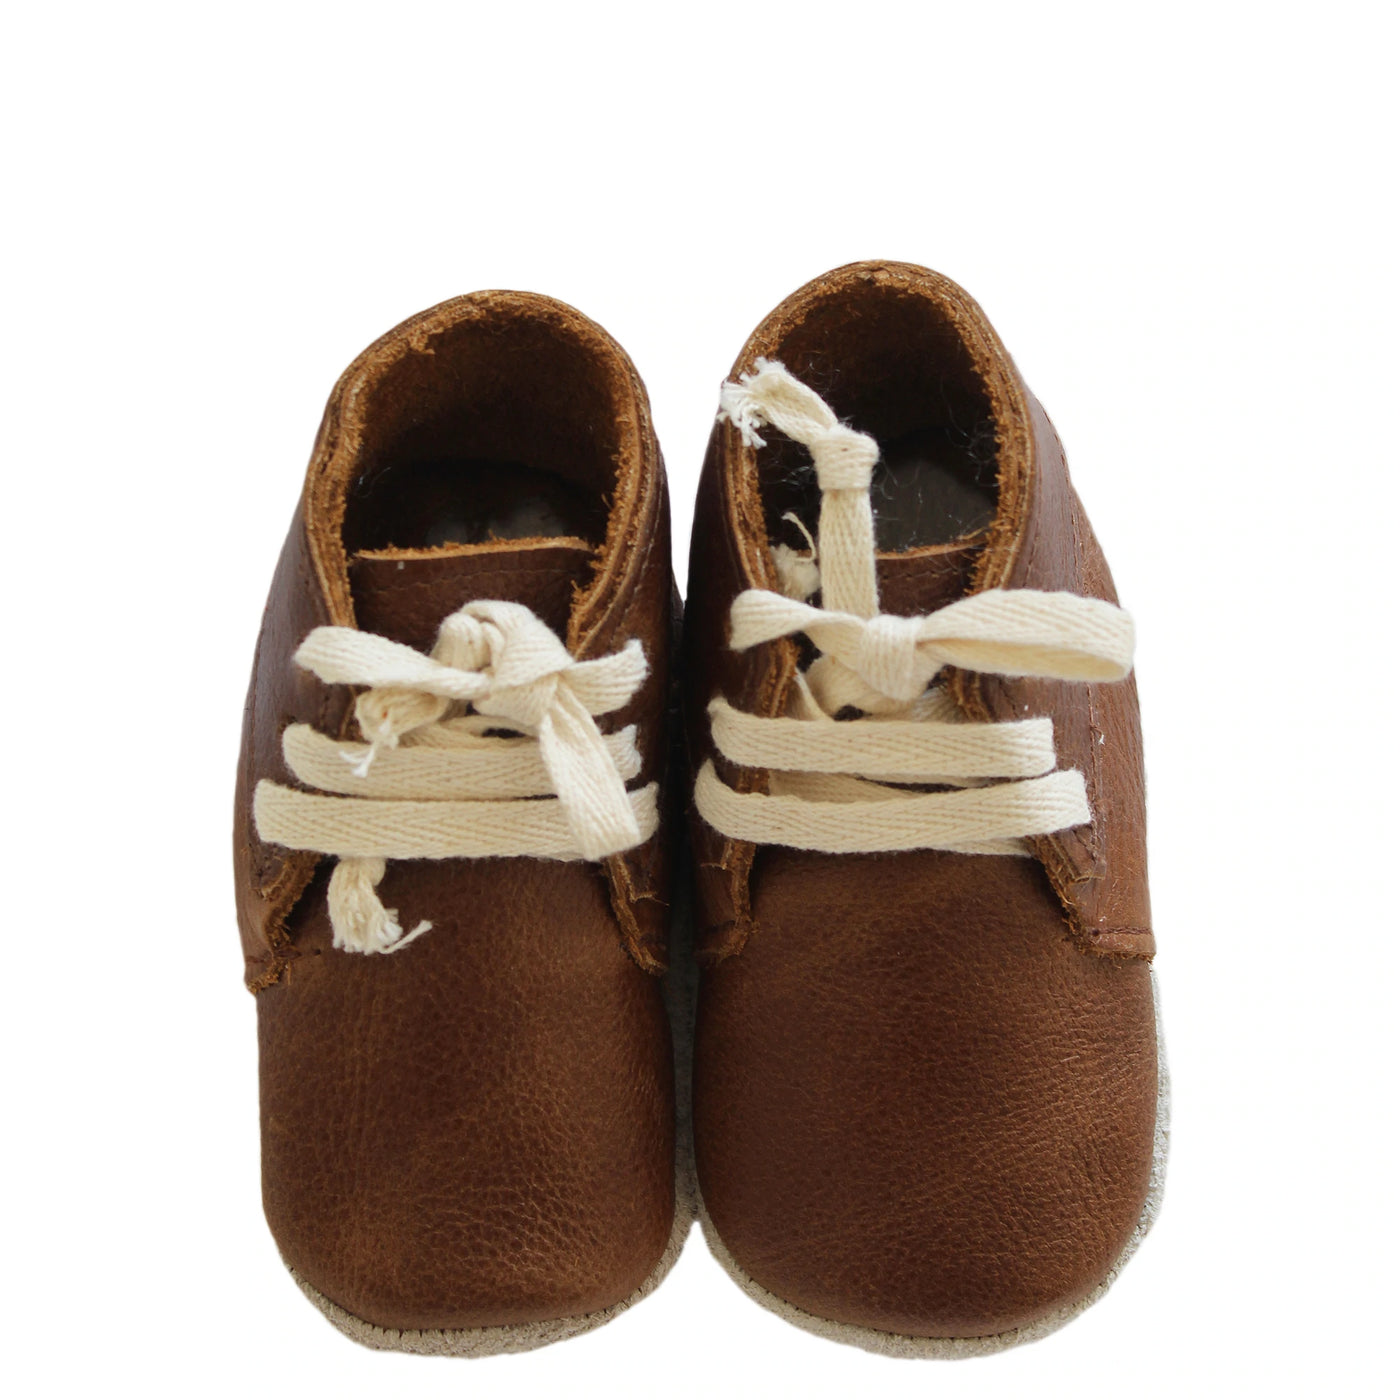 Lace Up Soft Sole Baby Shoes